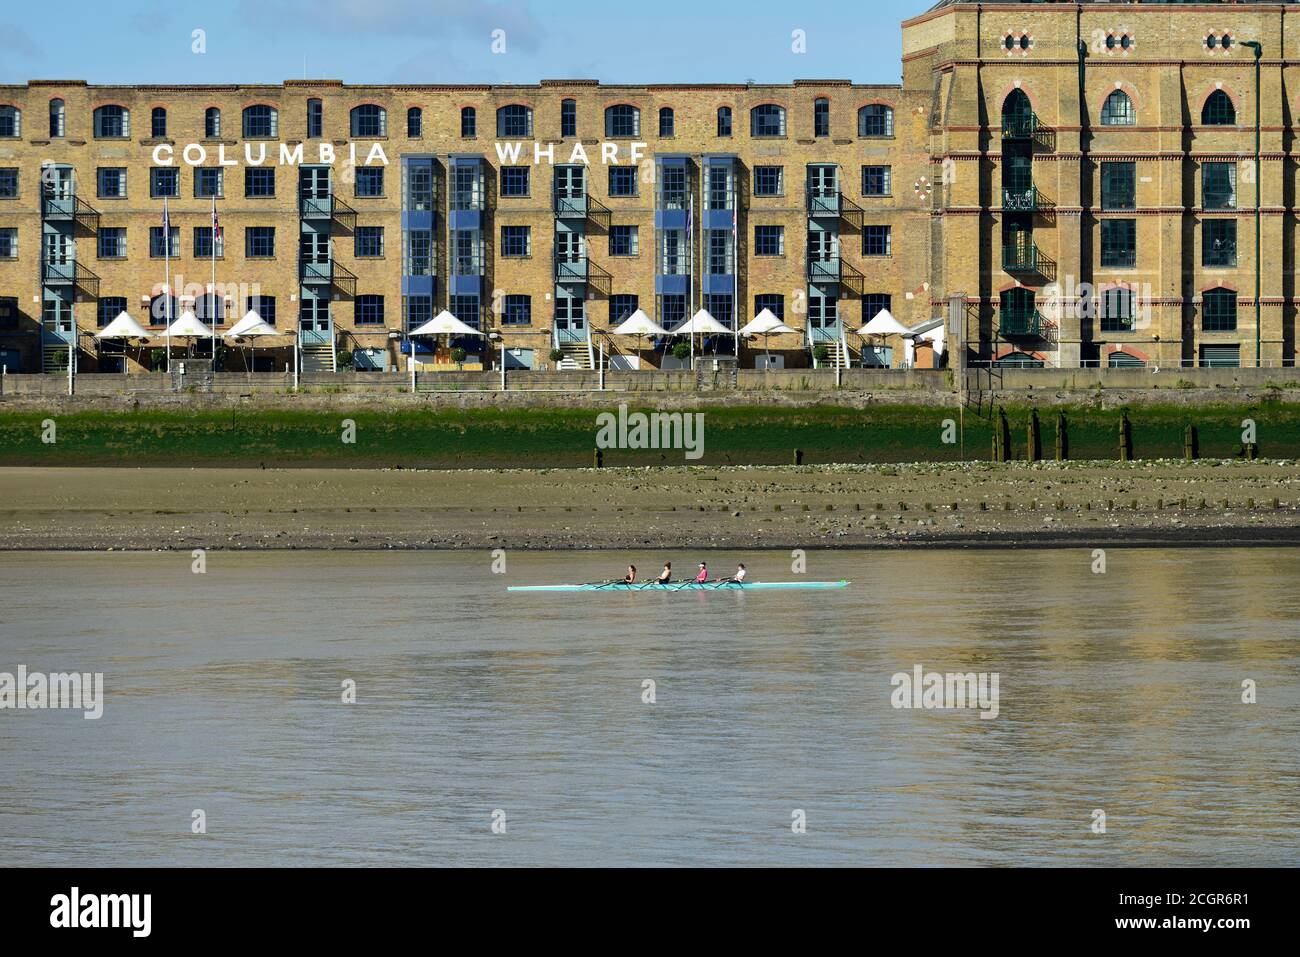 Coxless four rowing on Thames at low tide, Canary Wharf, East London, United Kingdom Stock Photo